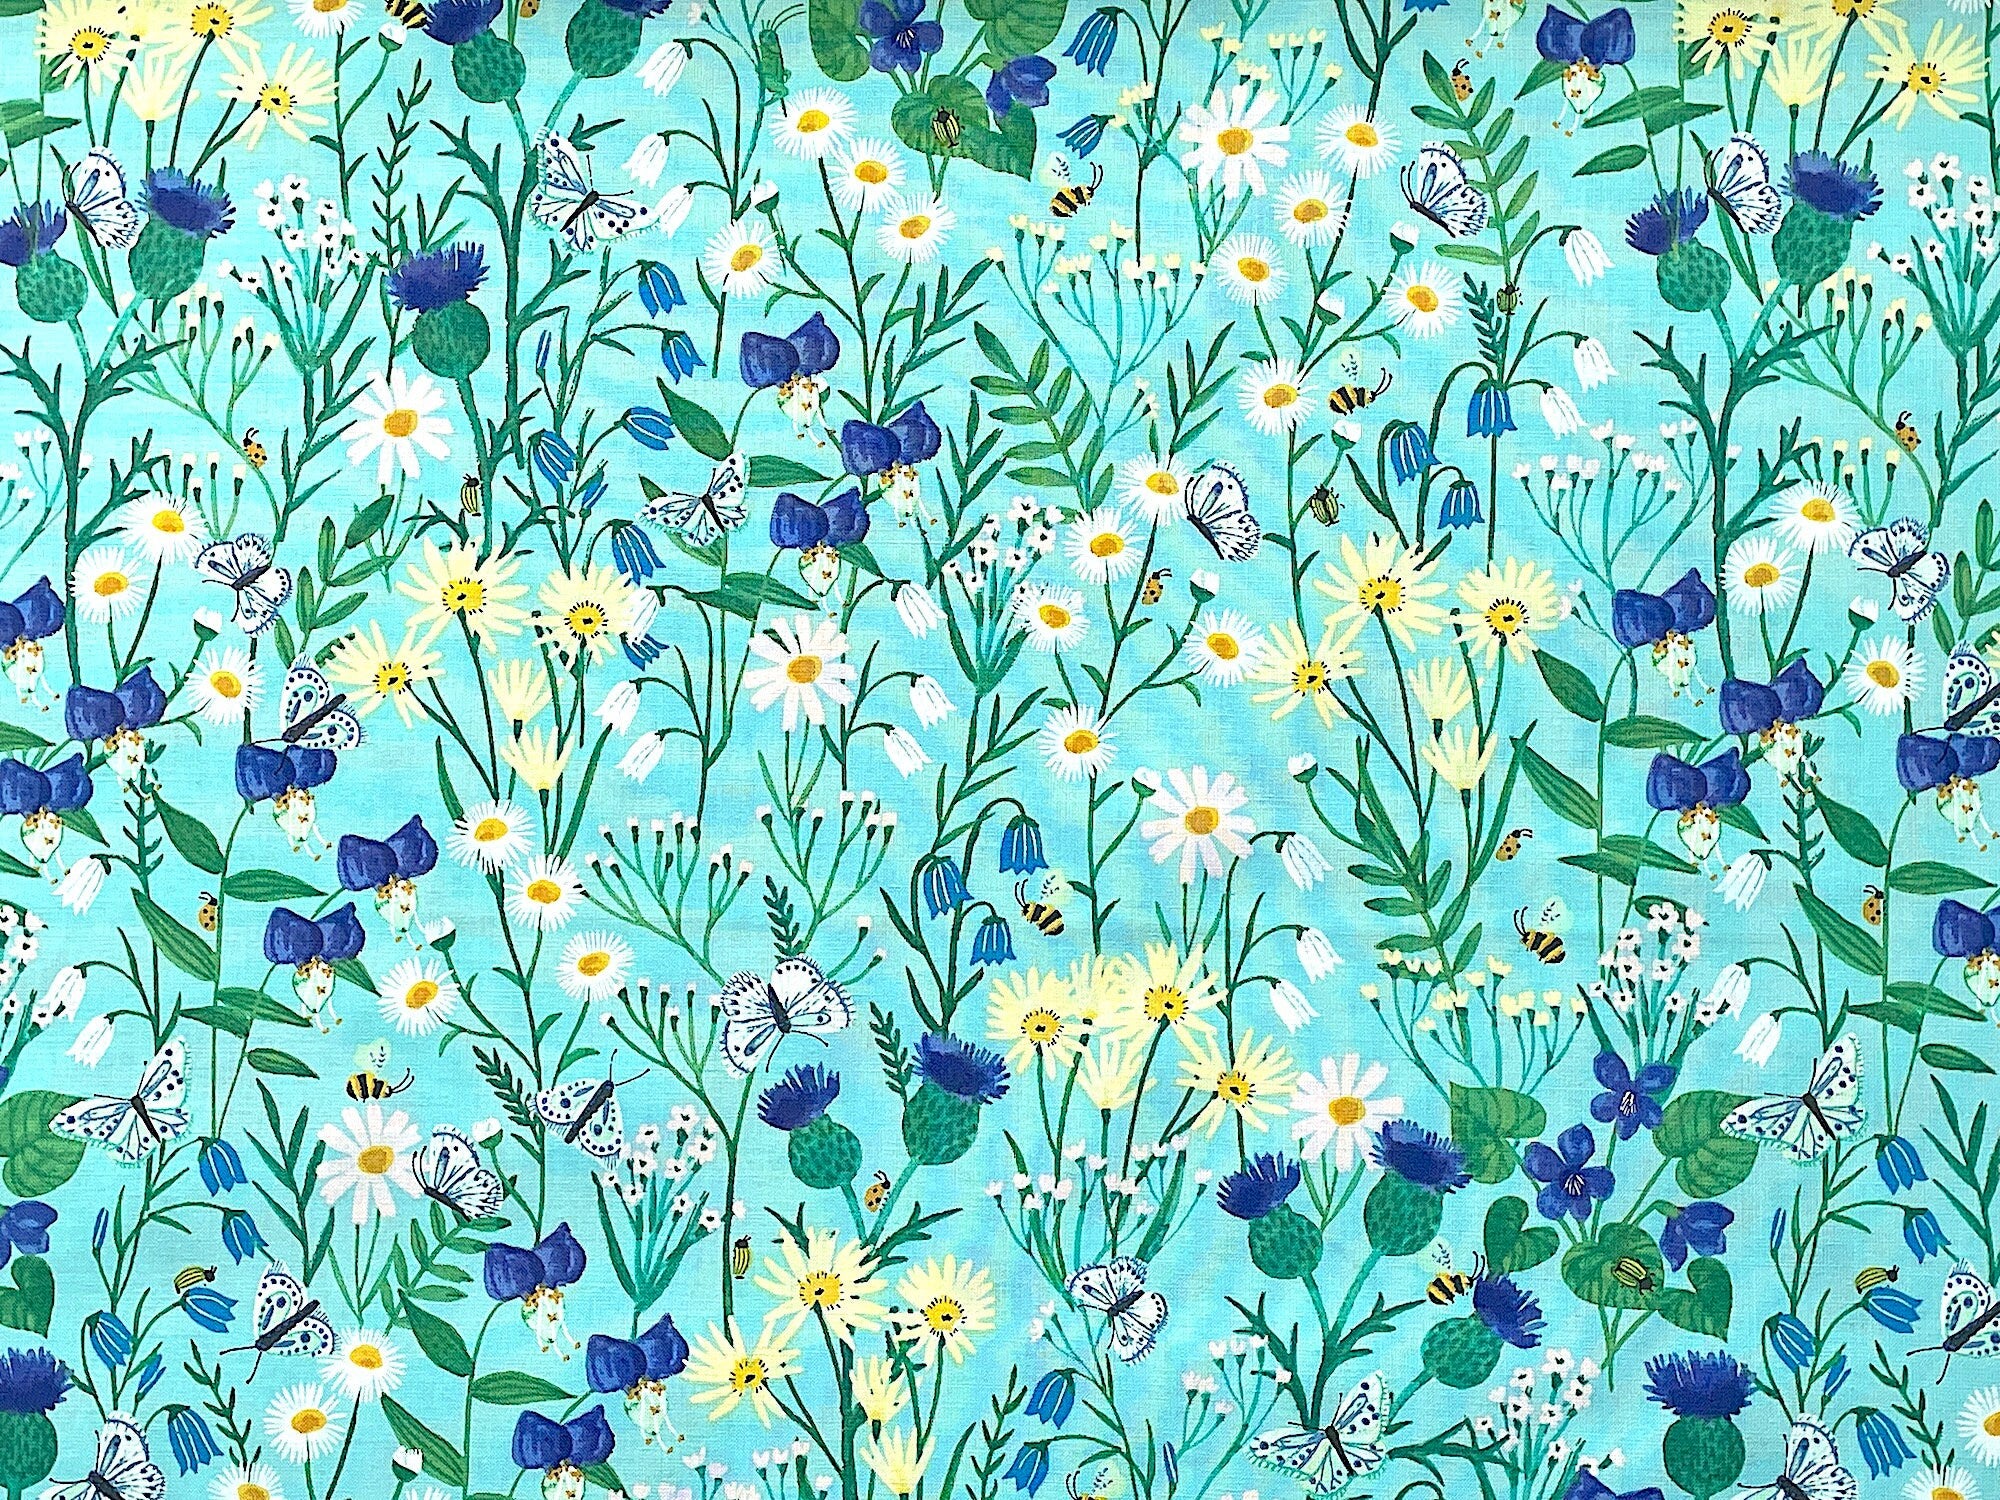 This fabric is part of the Springtime collection by Rebecca Jones. This aqua fabric is covered with white, yellow and blue flowers. There are also bees and butterflies throughout the pattern.